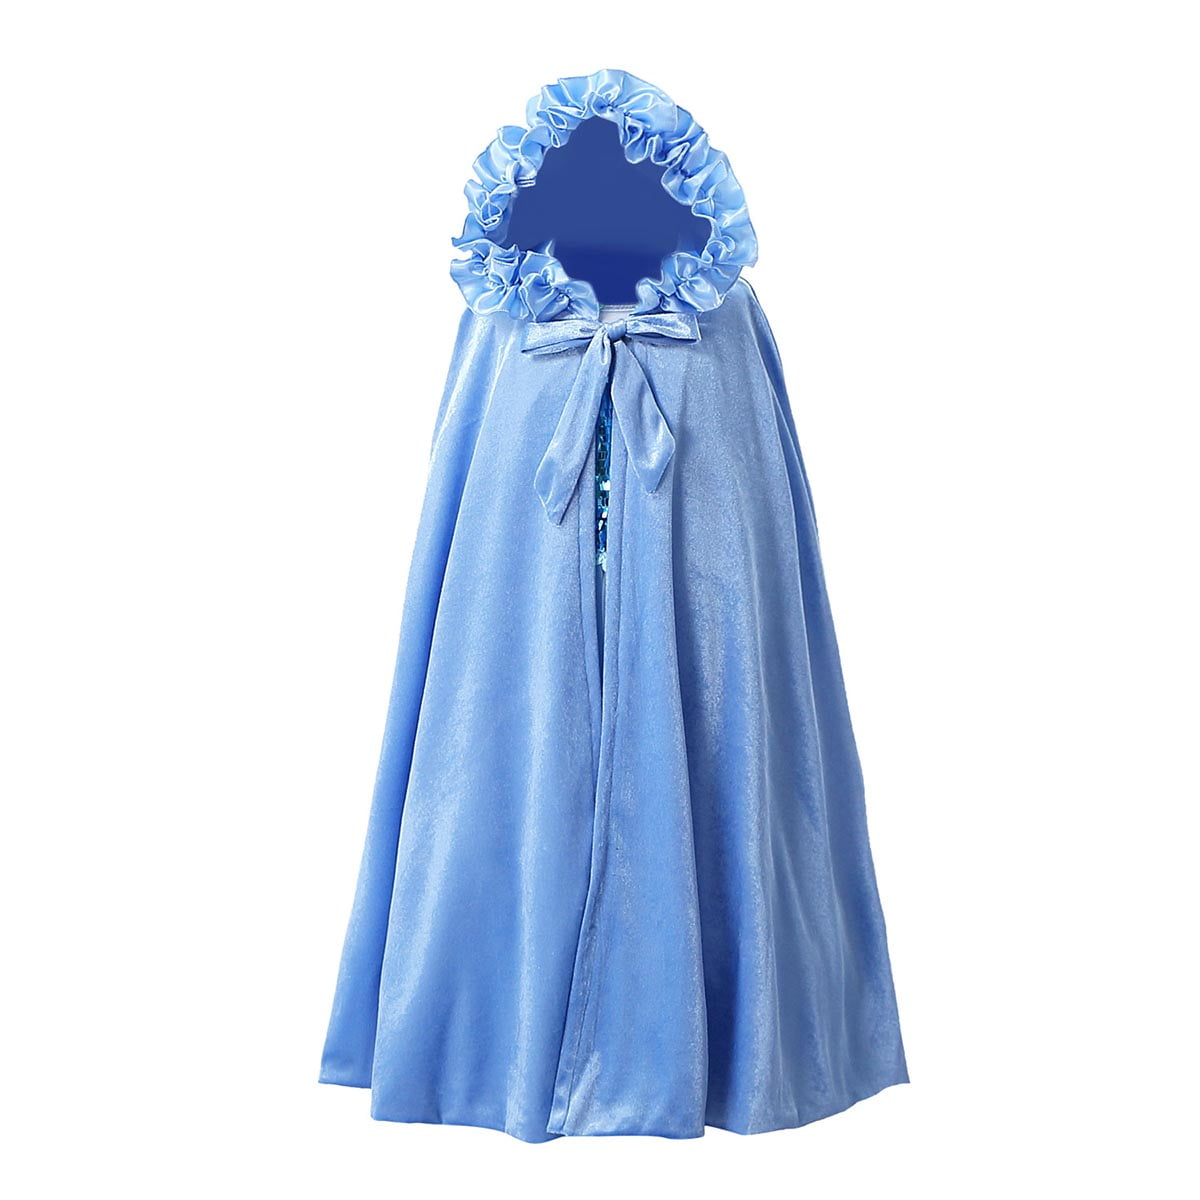 Fur Princess Hooded Cape Cloaks Costume for Girls Dress Up 3-12 Years 